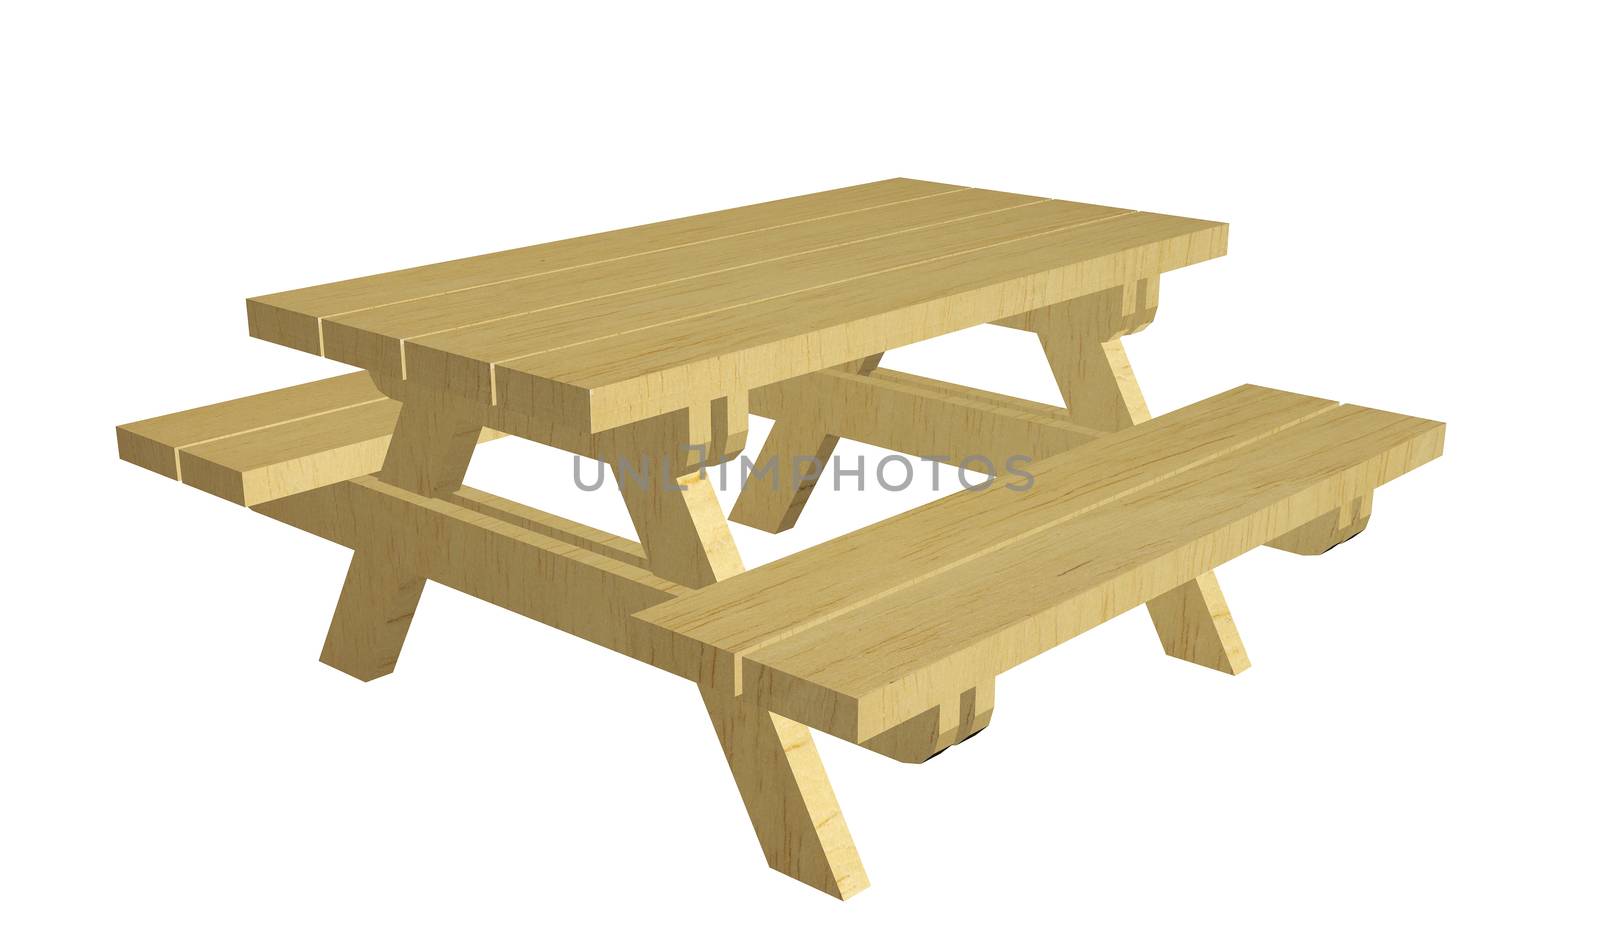 Wooden picnic table, 3d illustration, isolated against a white background